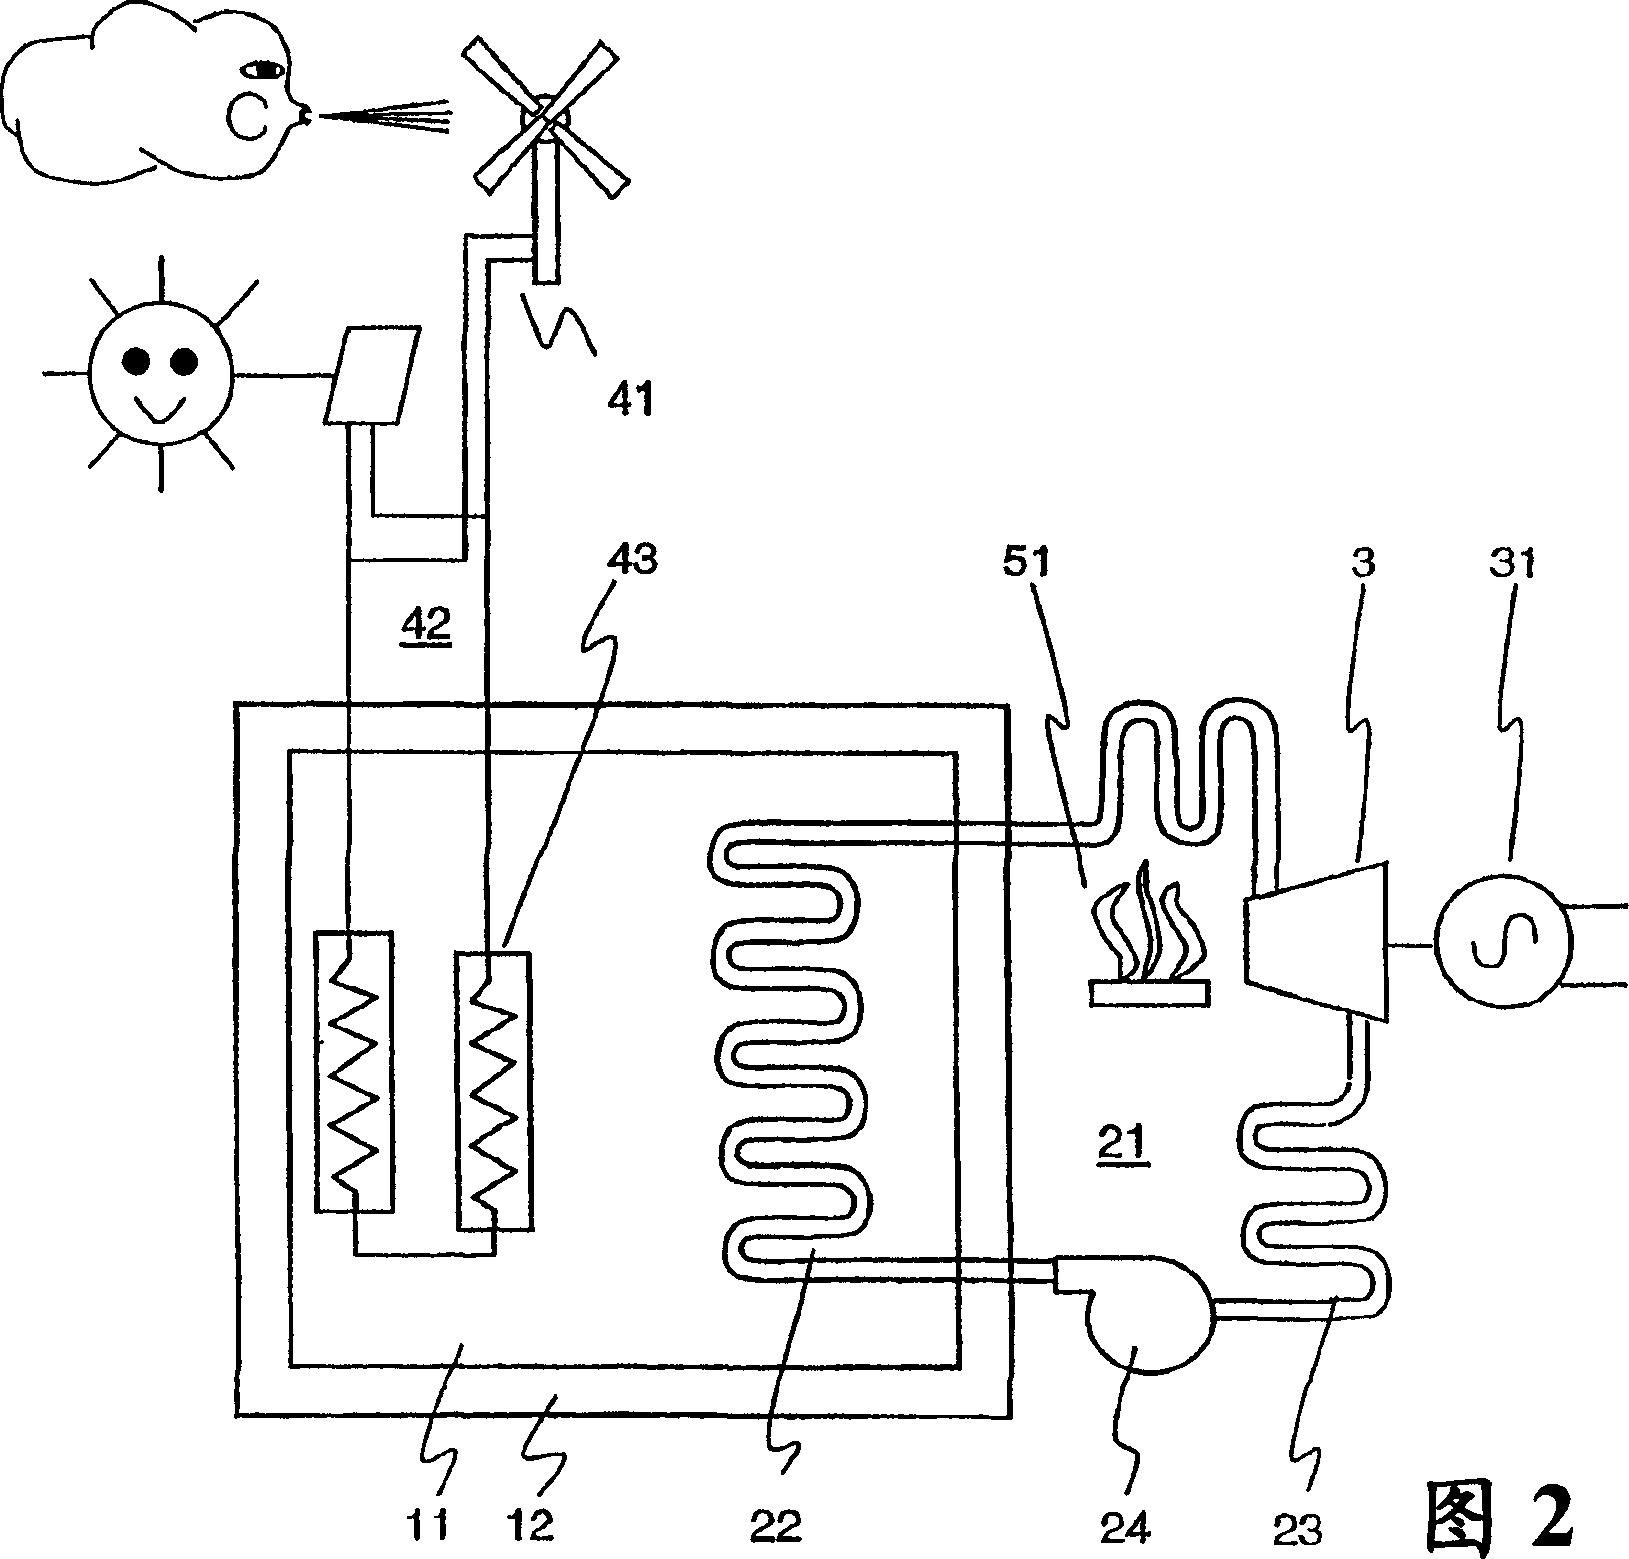 Apparatus and method for storing thermal energy and generating electricity